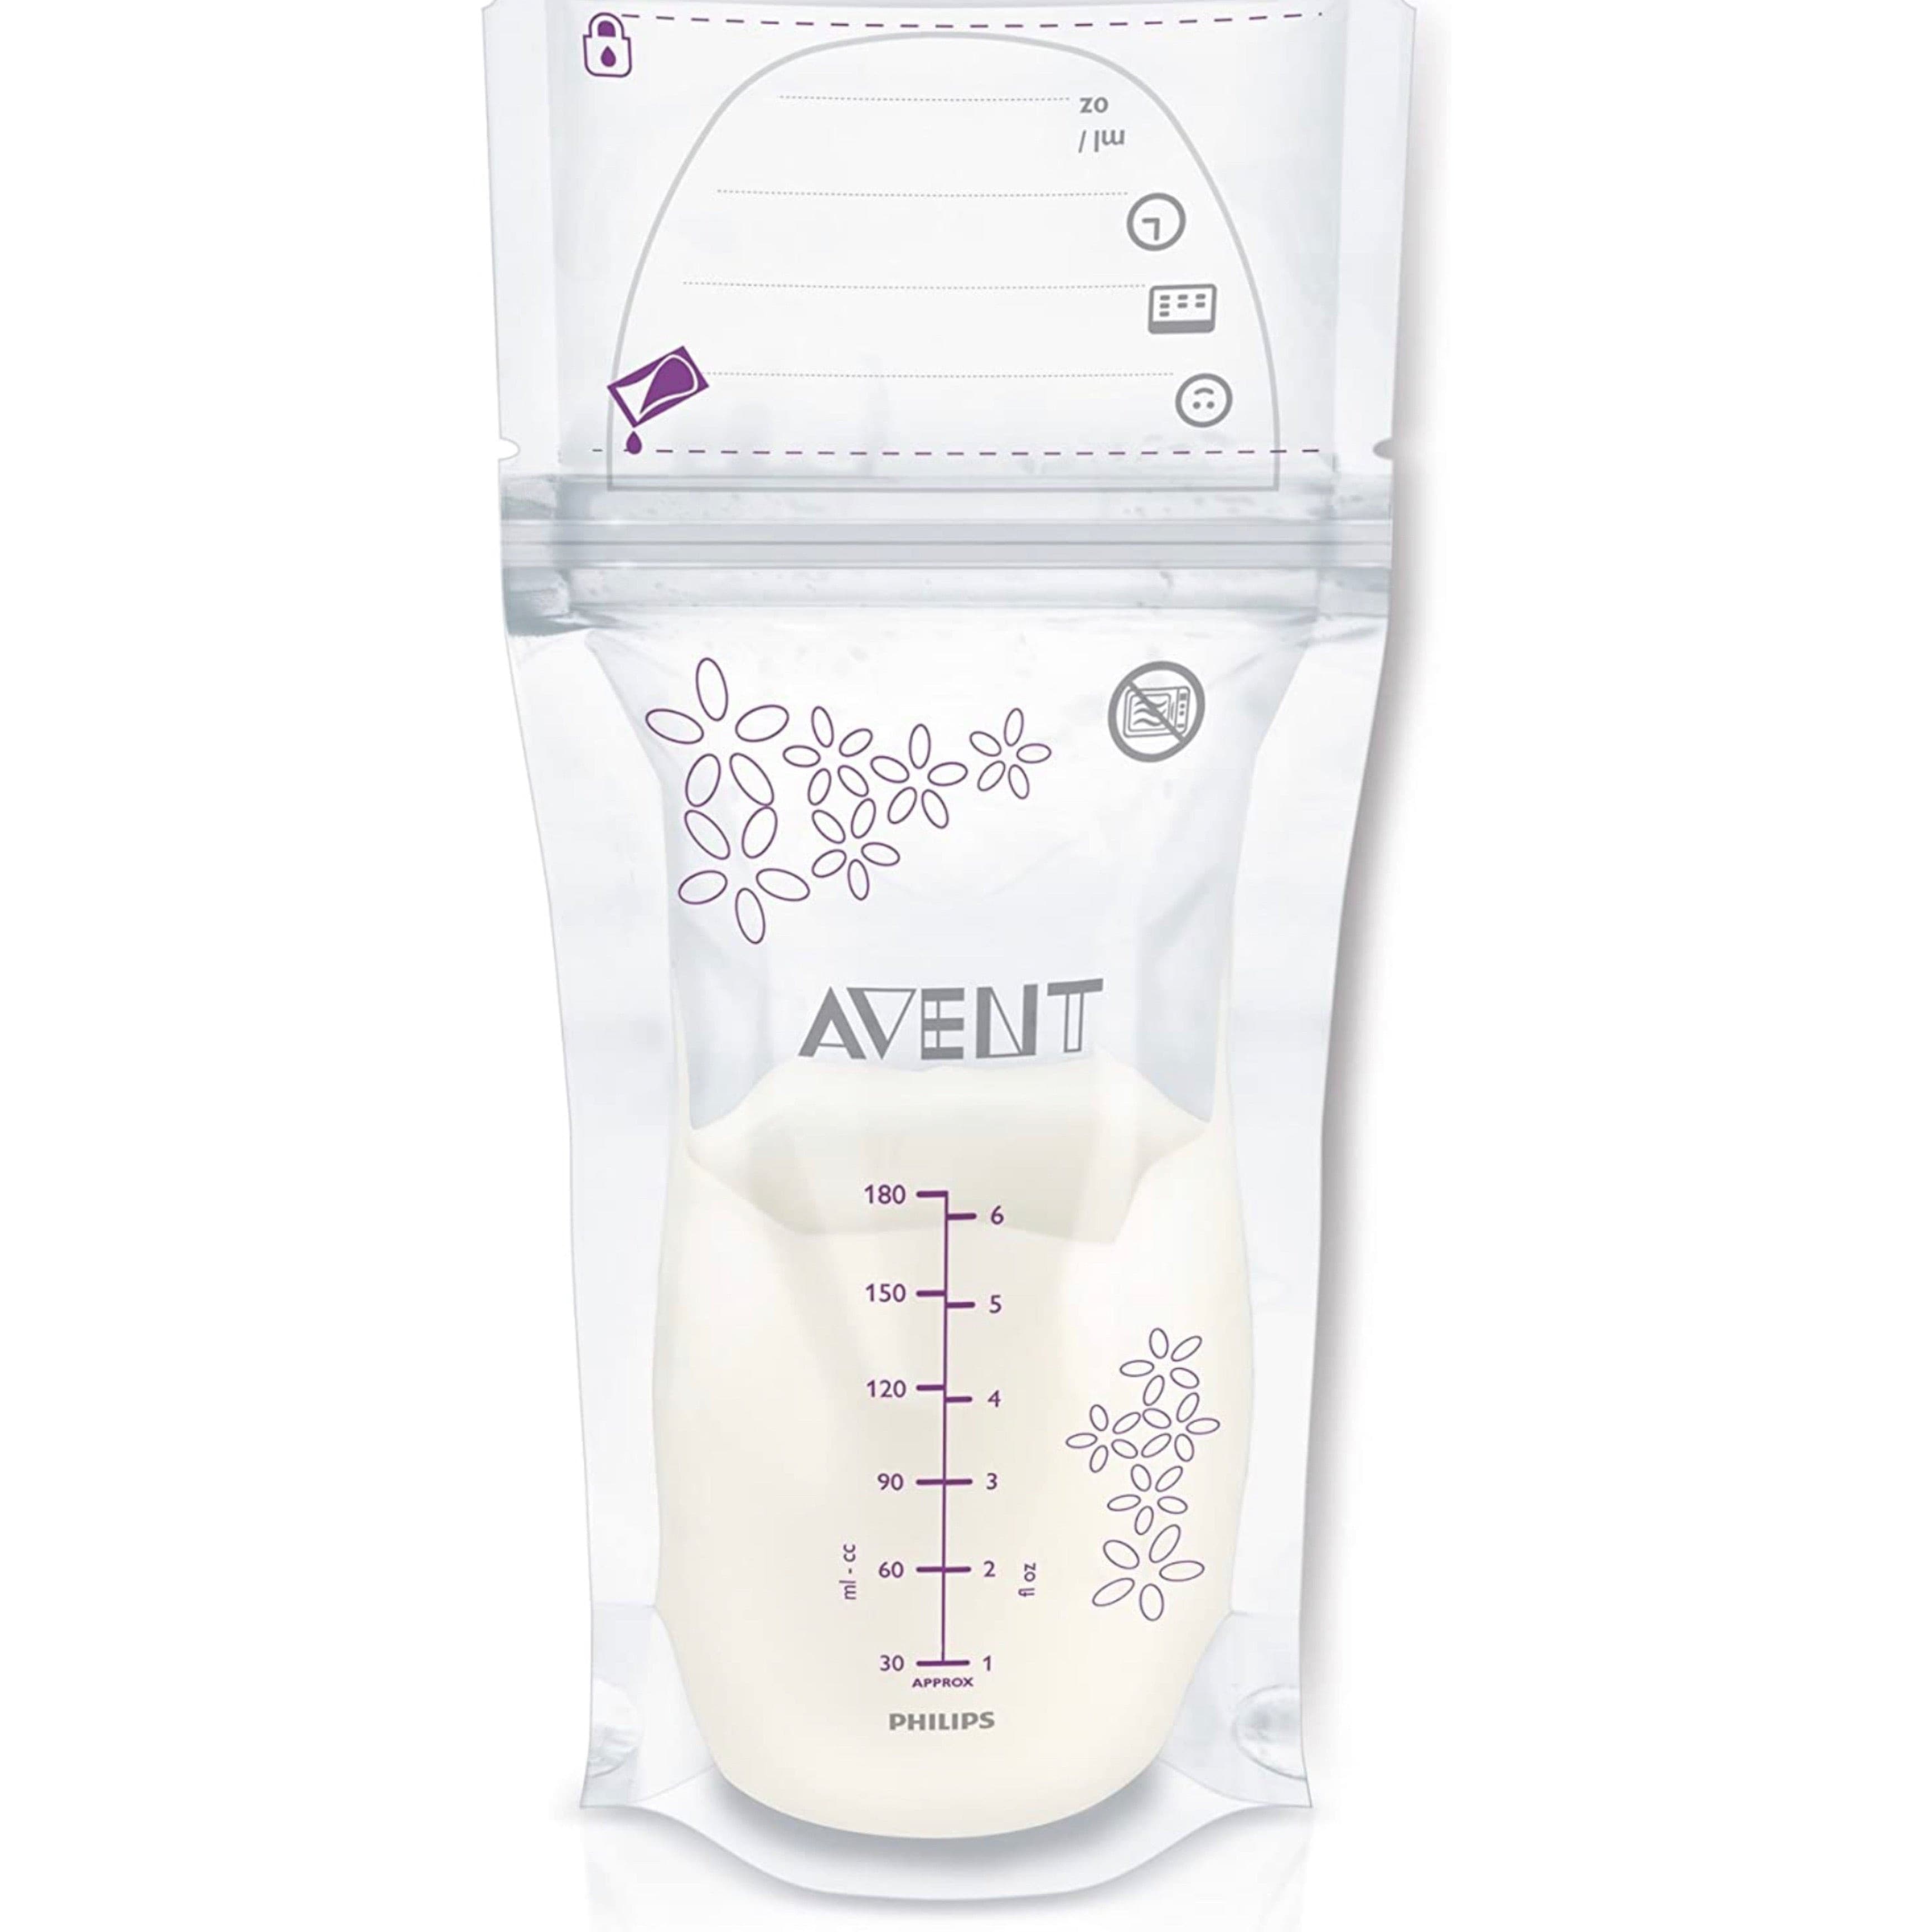 Philips AVENT Breast Milk Storage Bags, 6 Ounce, 25 Count.